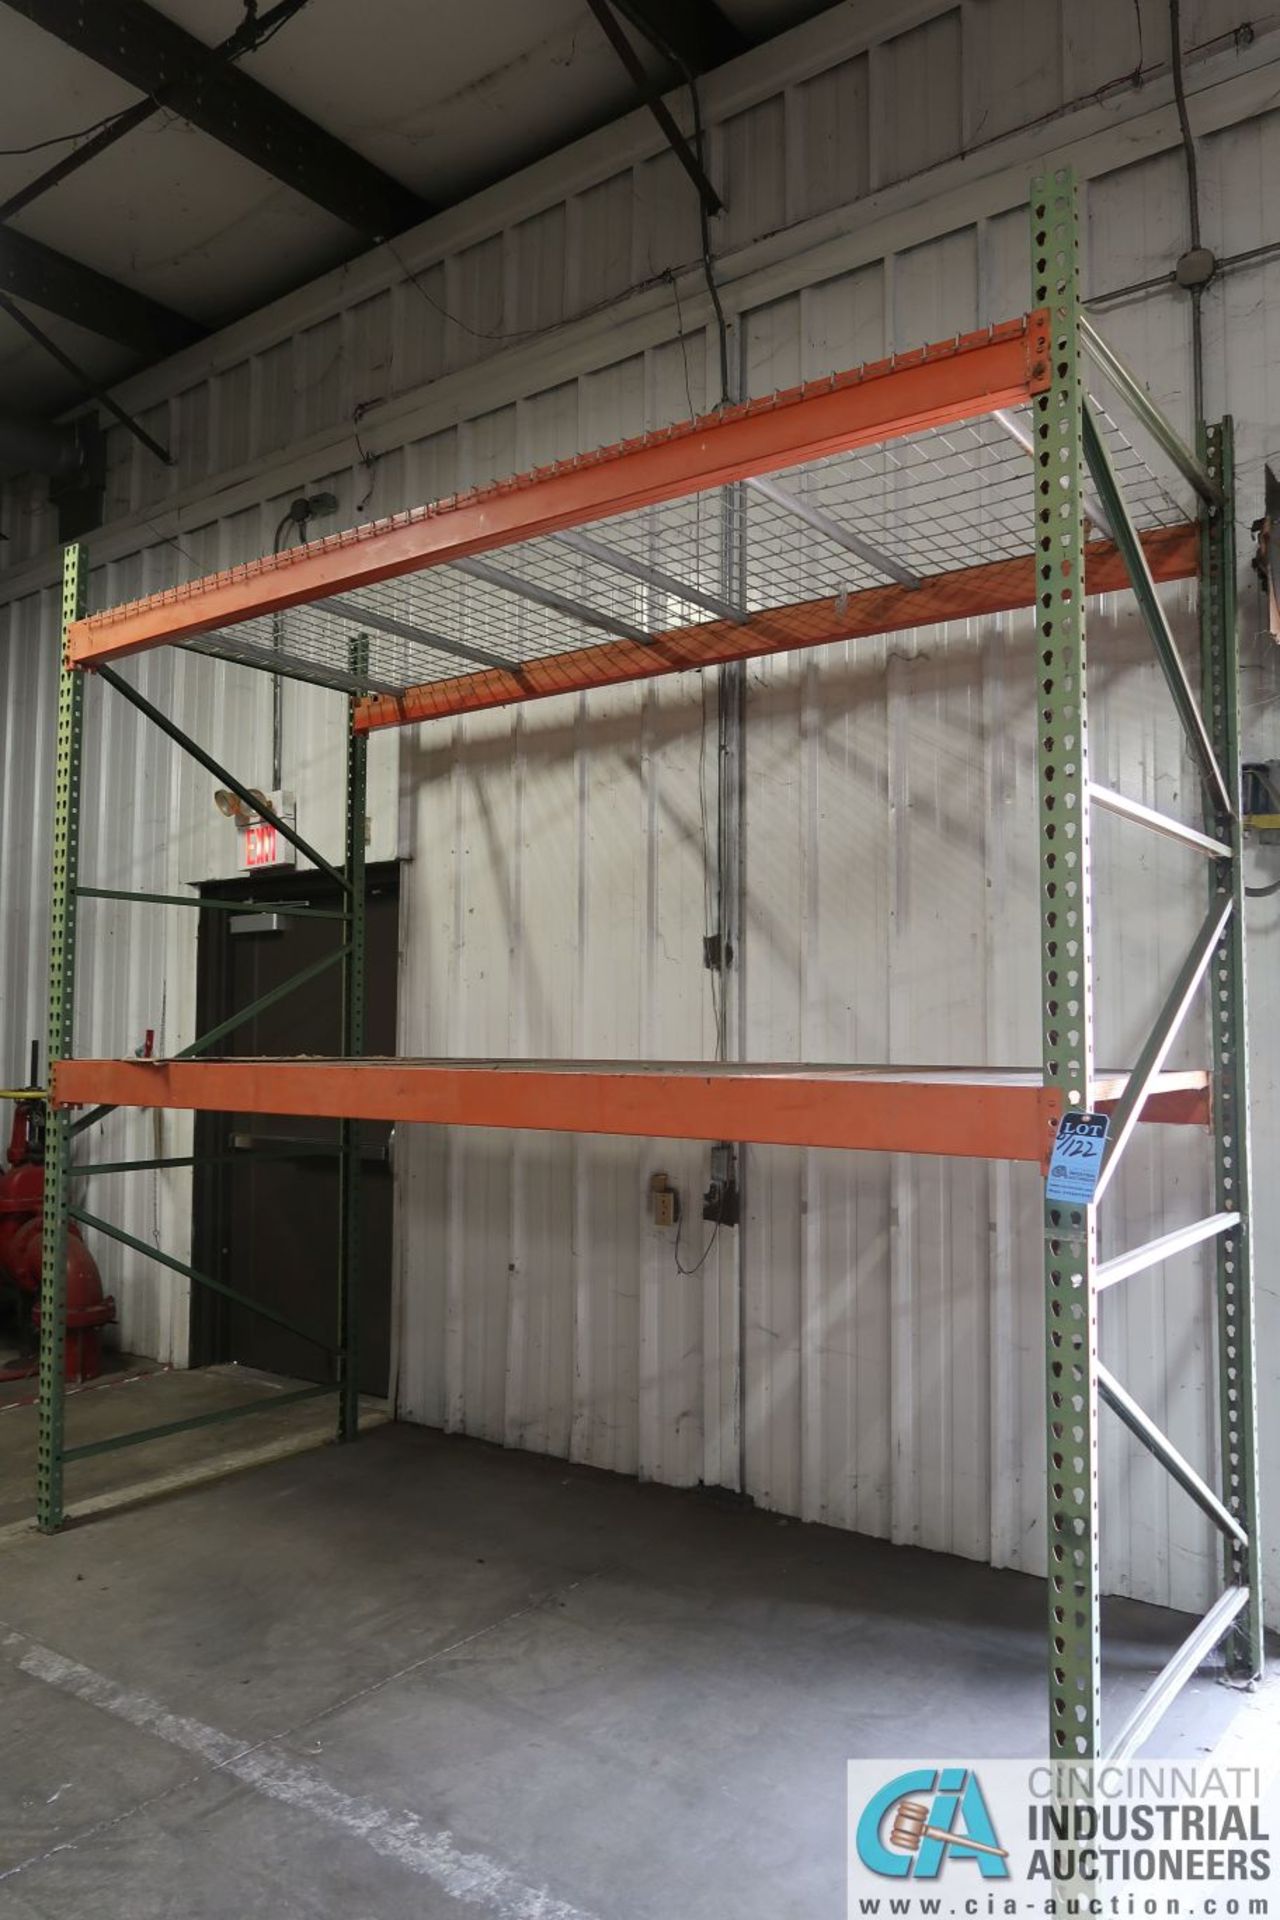 Free-Standing Sections Orange and Green Pallet Rack Along Dock Wall (8) Uprights, (14) Beams, (12) - Image 4 of 17